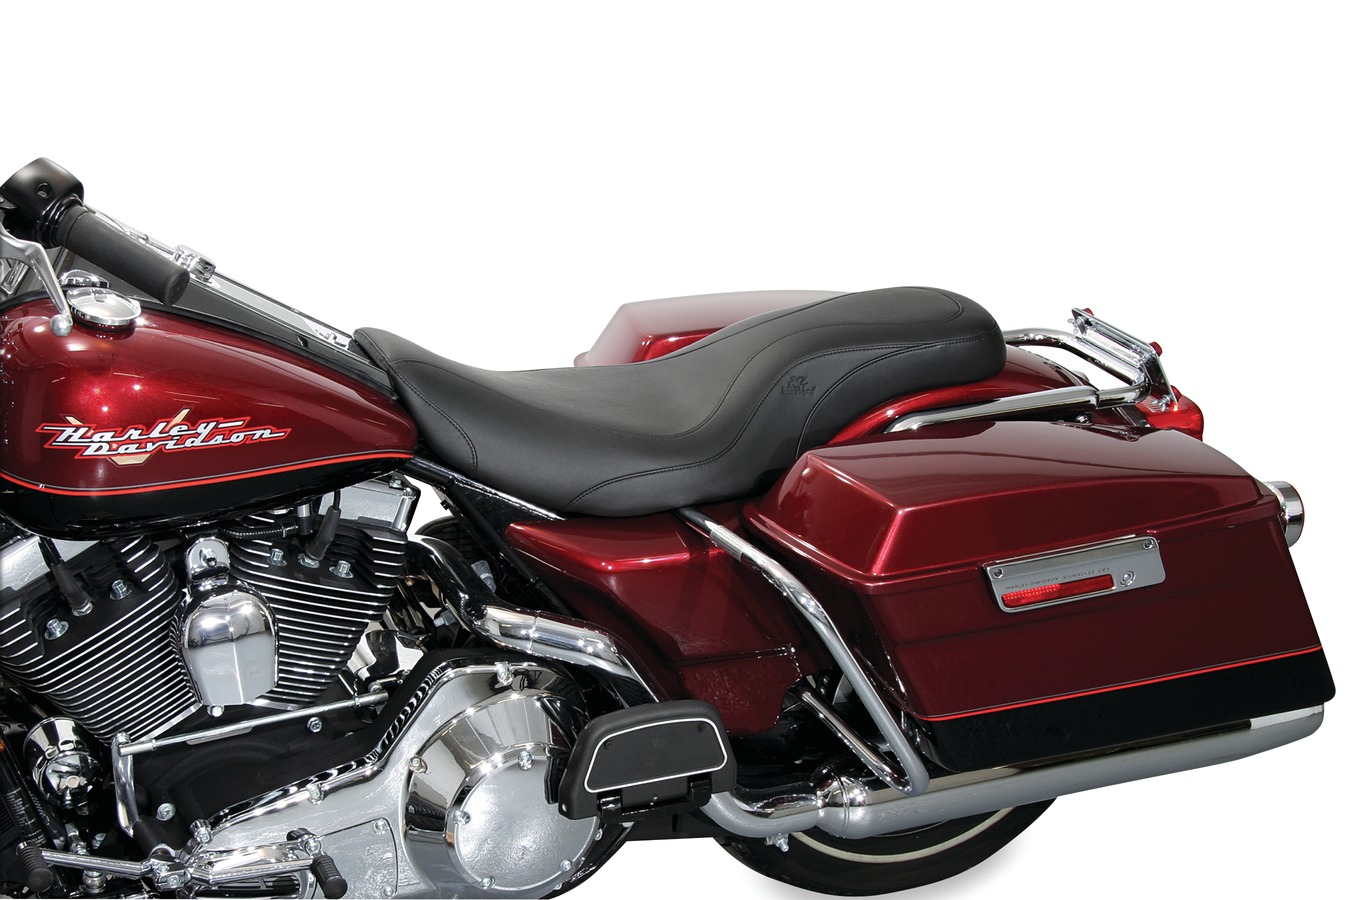 DayTripper™ One-Piece Seat for Harley-Davidson Road King 1997-